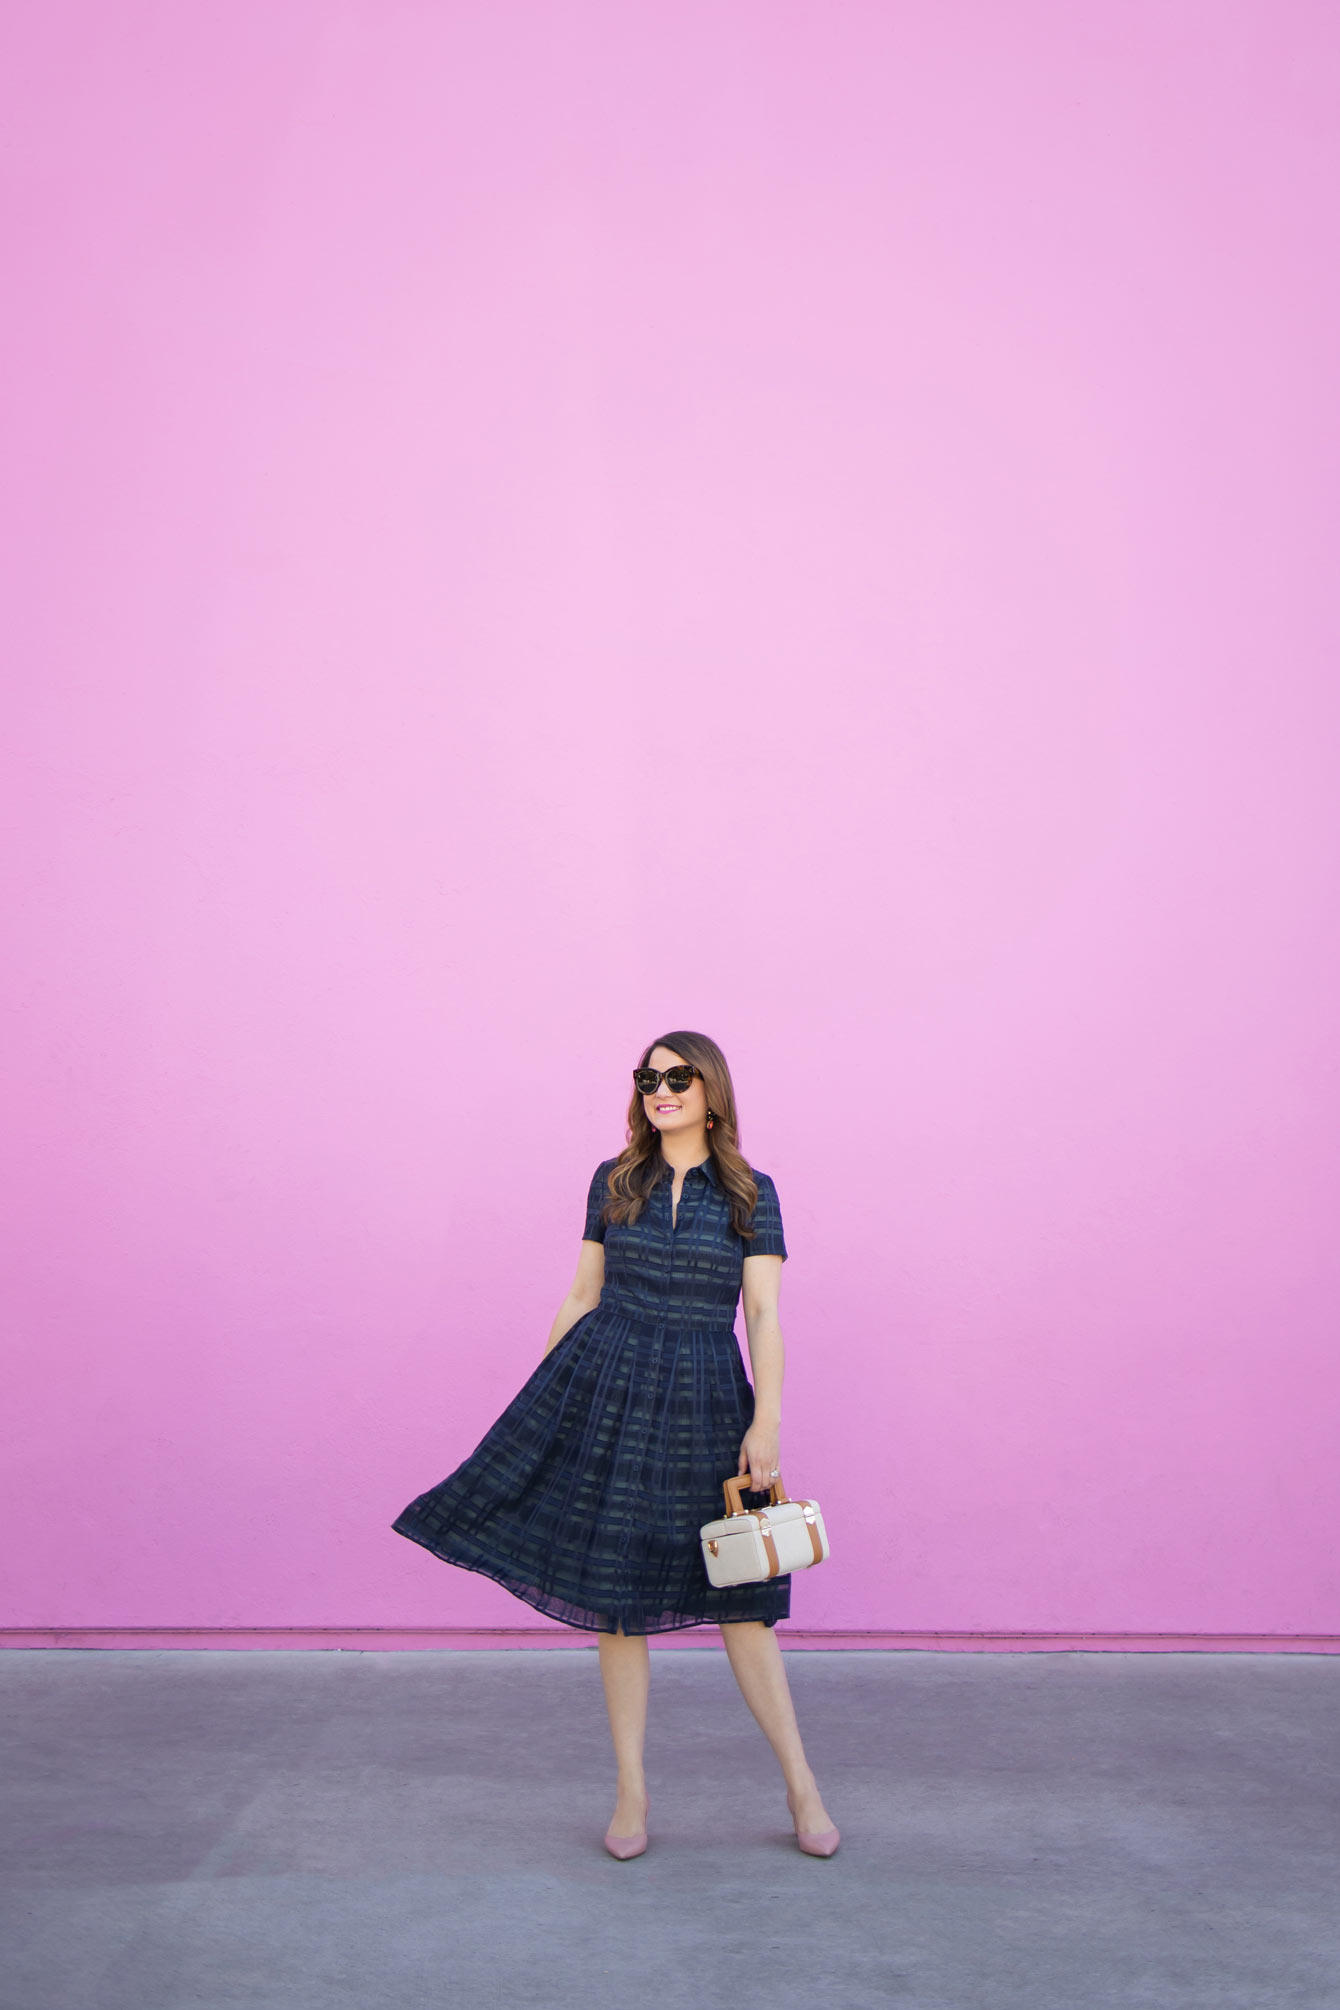 Paul Smith Pink Wall Los Angeles